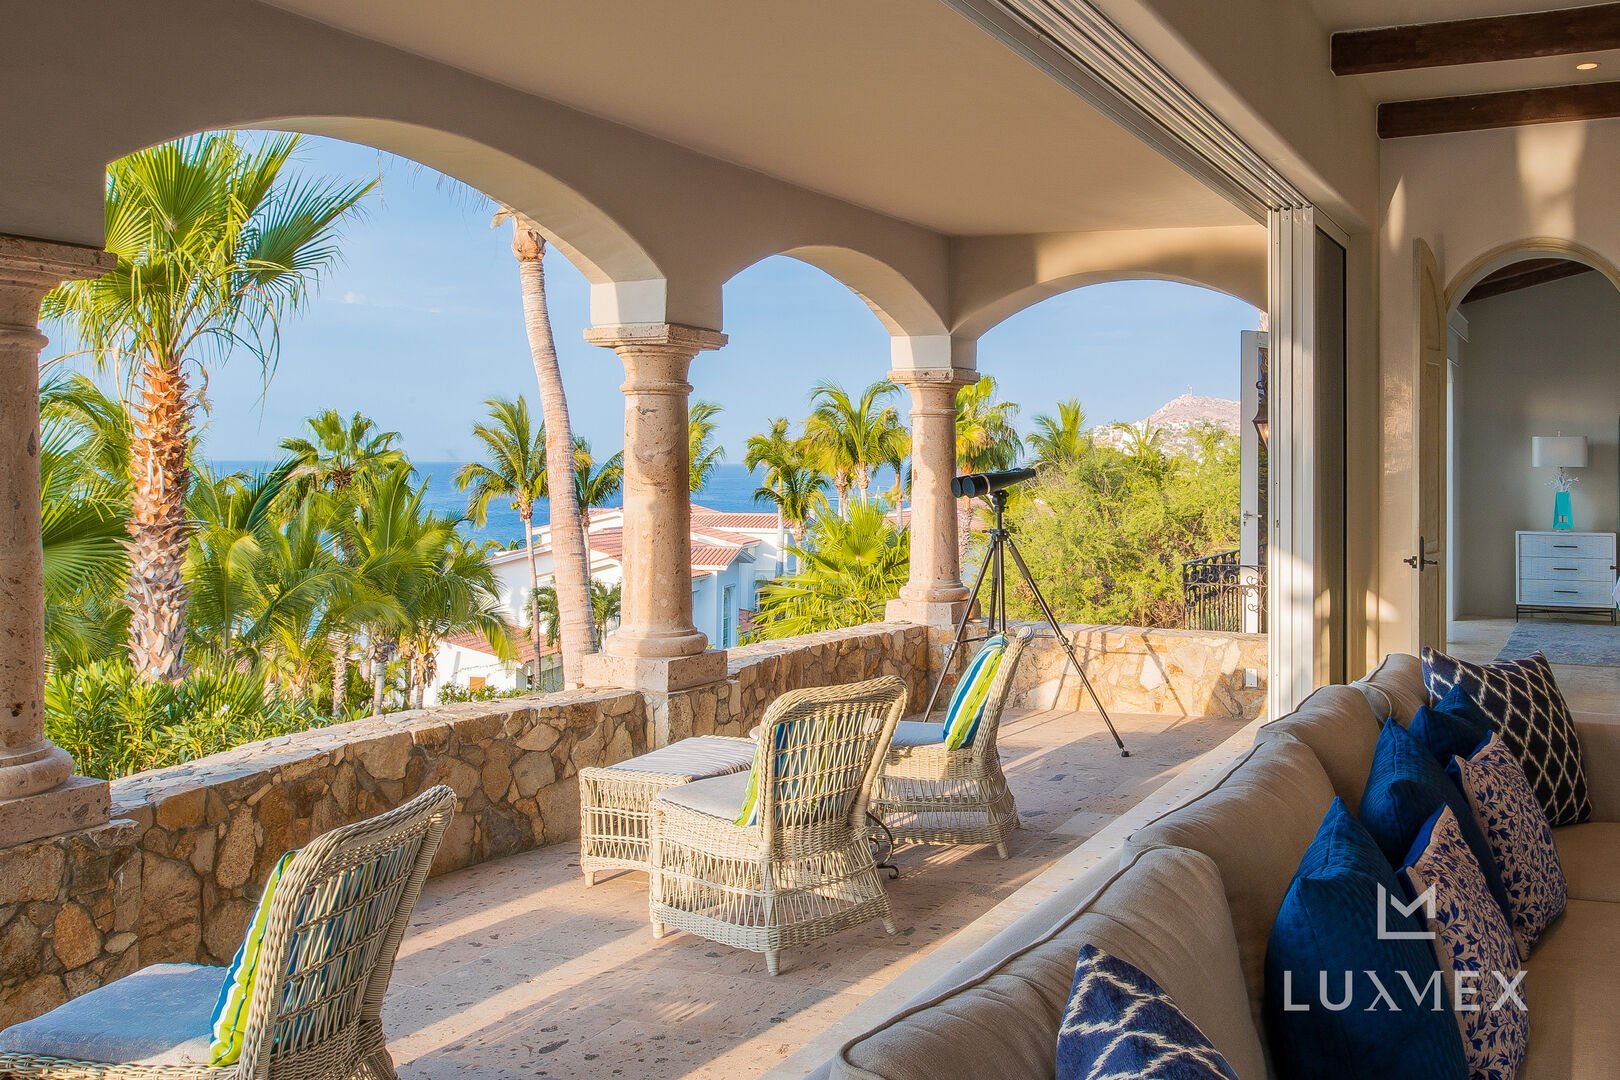 One of the patios of this Los Cabos Luxury Vacation Villa, with a telescope and patio chairs.